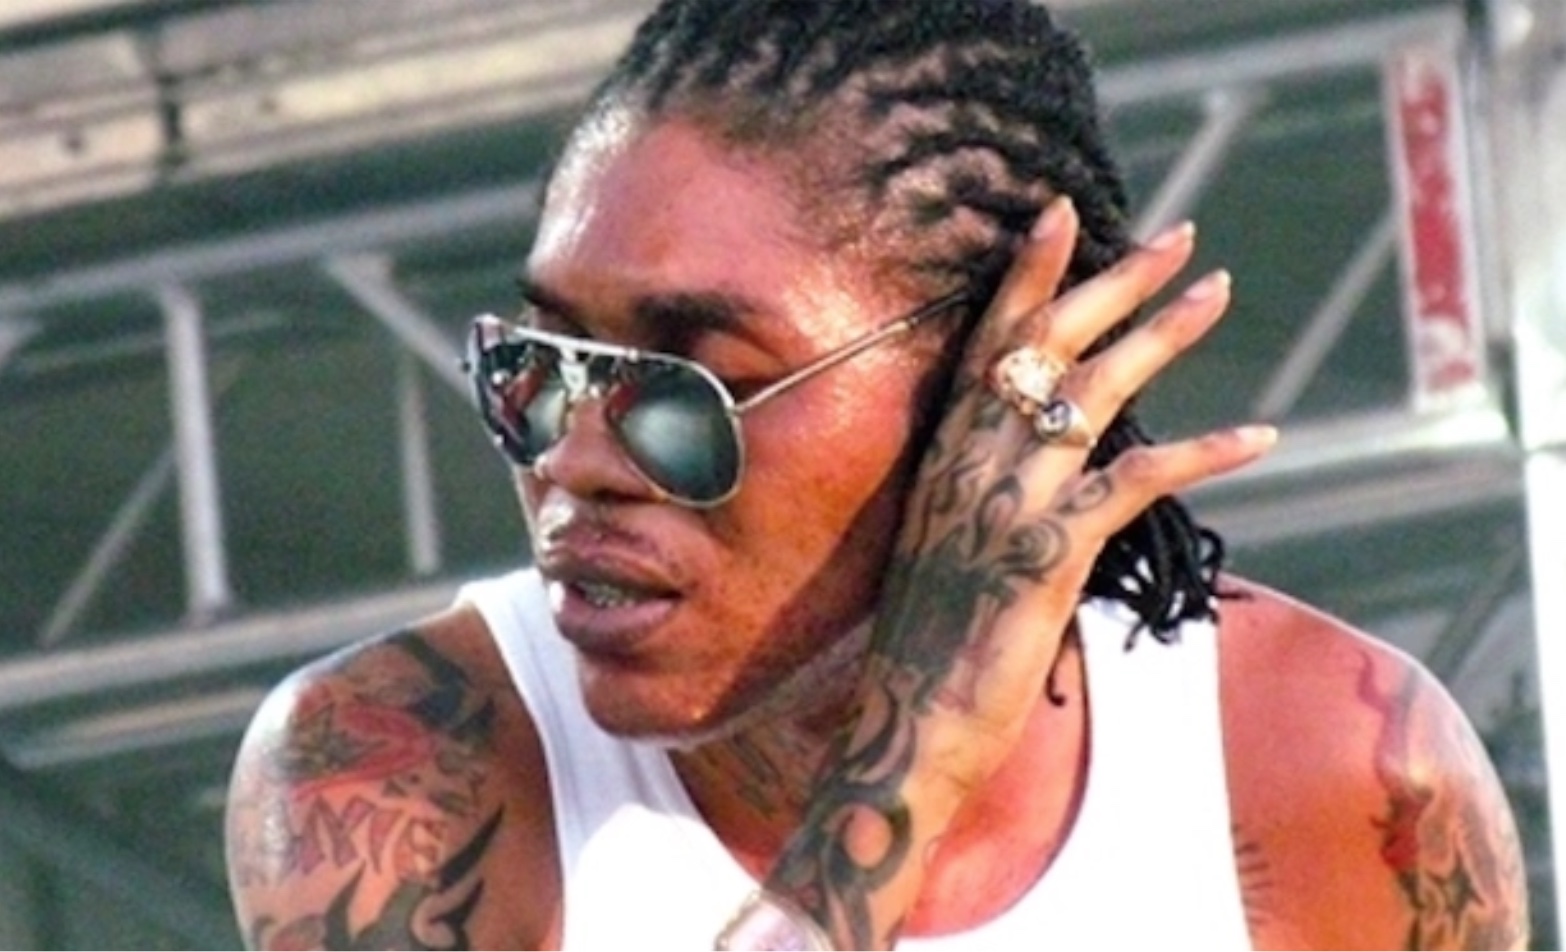 Check Out These Vybz Kartel Unreleased Songs Including Collab With Spice And Popcaan – YARDHYPE